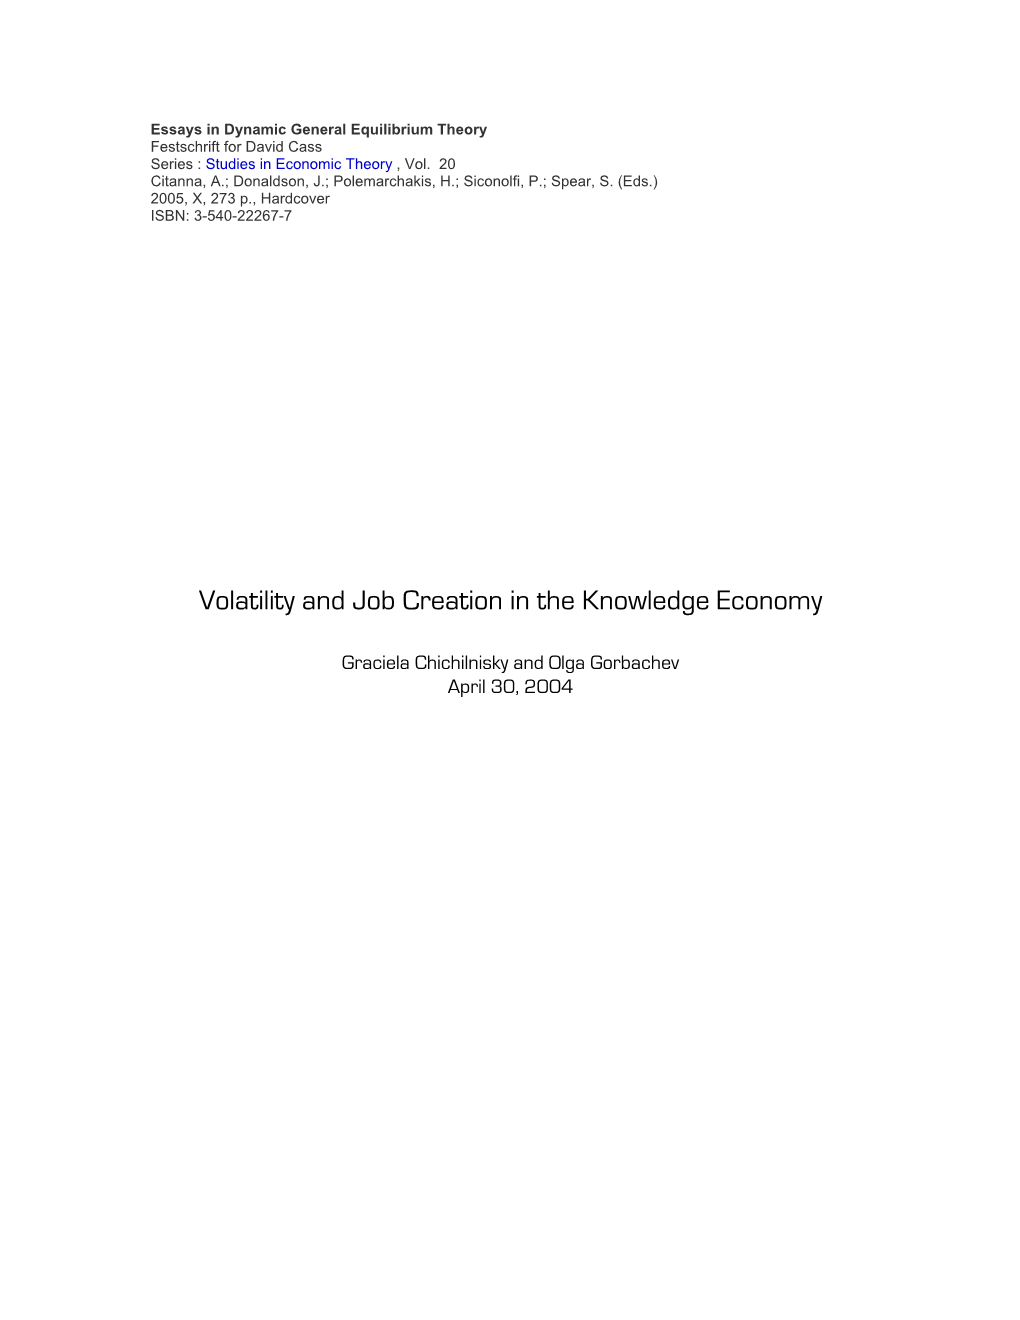 Volatility and Job Creation in the Knowledge Economy